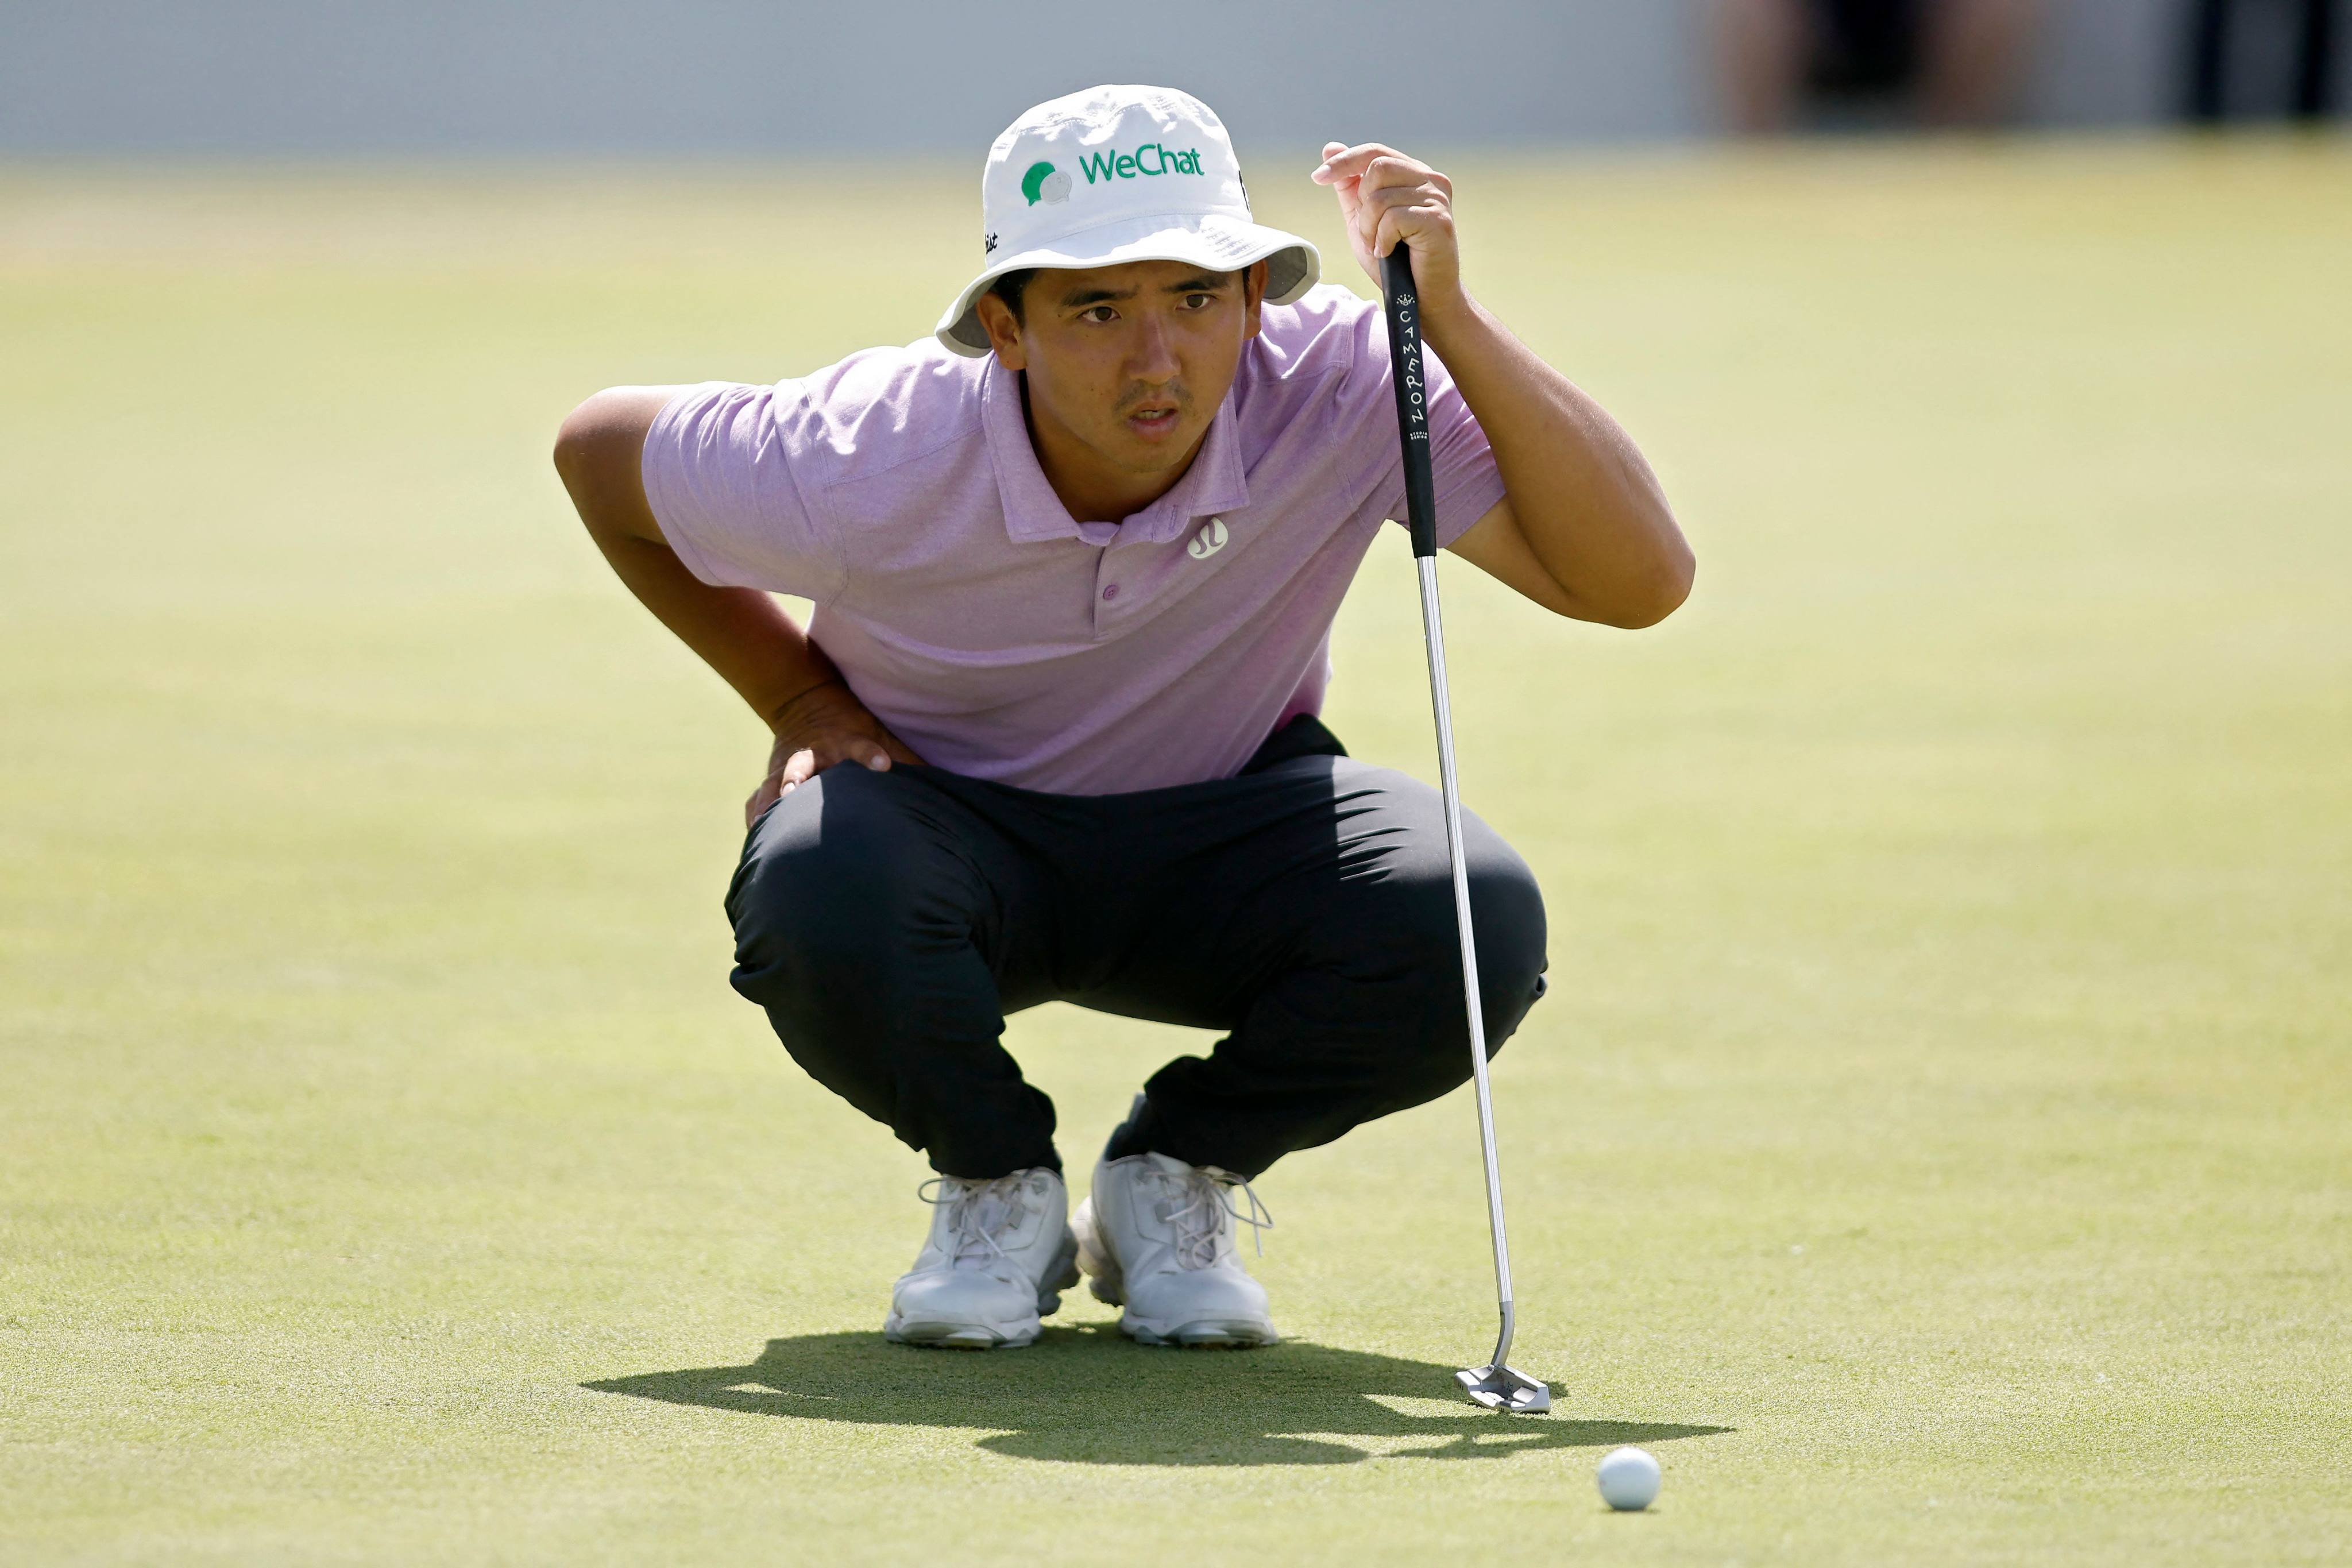 Marty Dou lines up a putt on the 18th green during the third round of the AT&T Byron Nelson. Photo: AFP